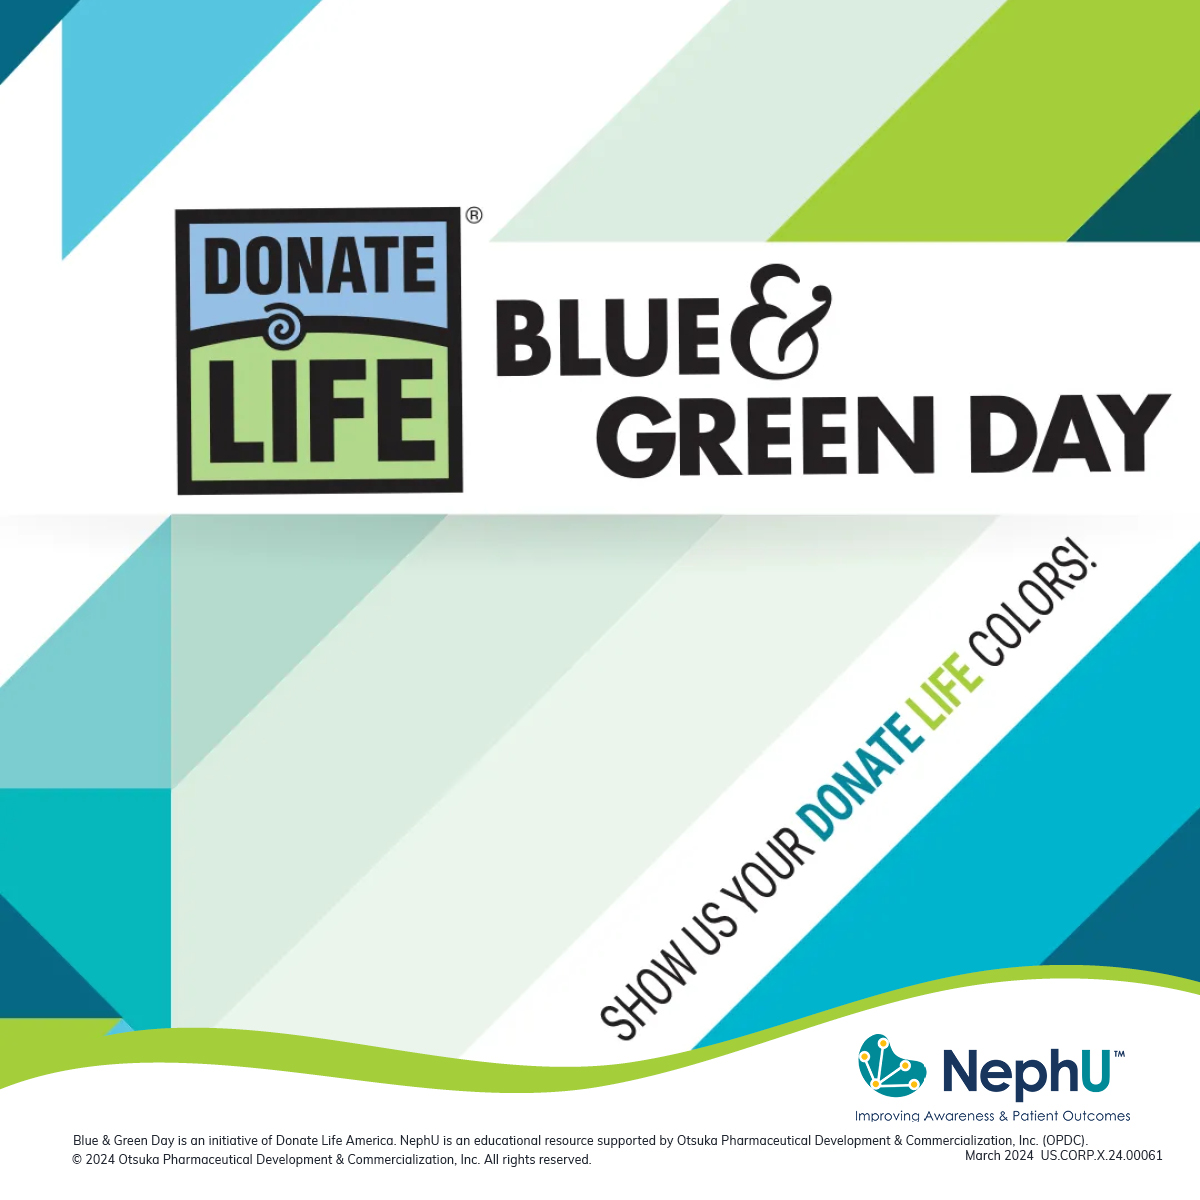 Celebrate National Donate Life Blue & Green Day by donning blue and green to support Donate Life America’s mission. This special day raises awareness about the life-saving importance of donation. go.nephu.org/LzZD #BlueGreenDay #DonateLife #LivingDonor #NephU